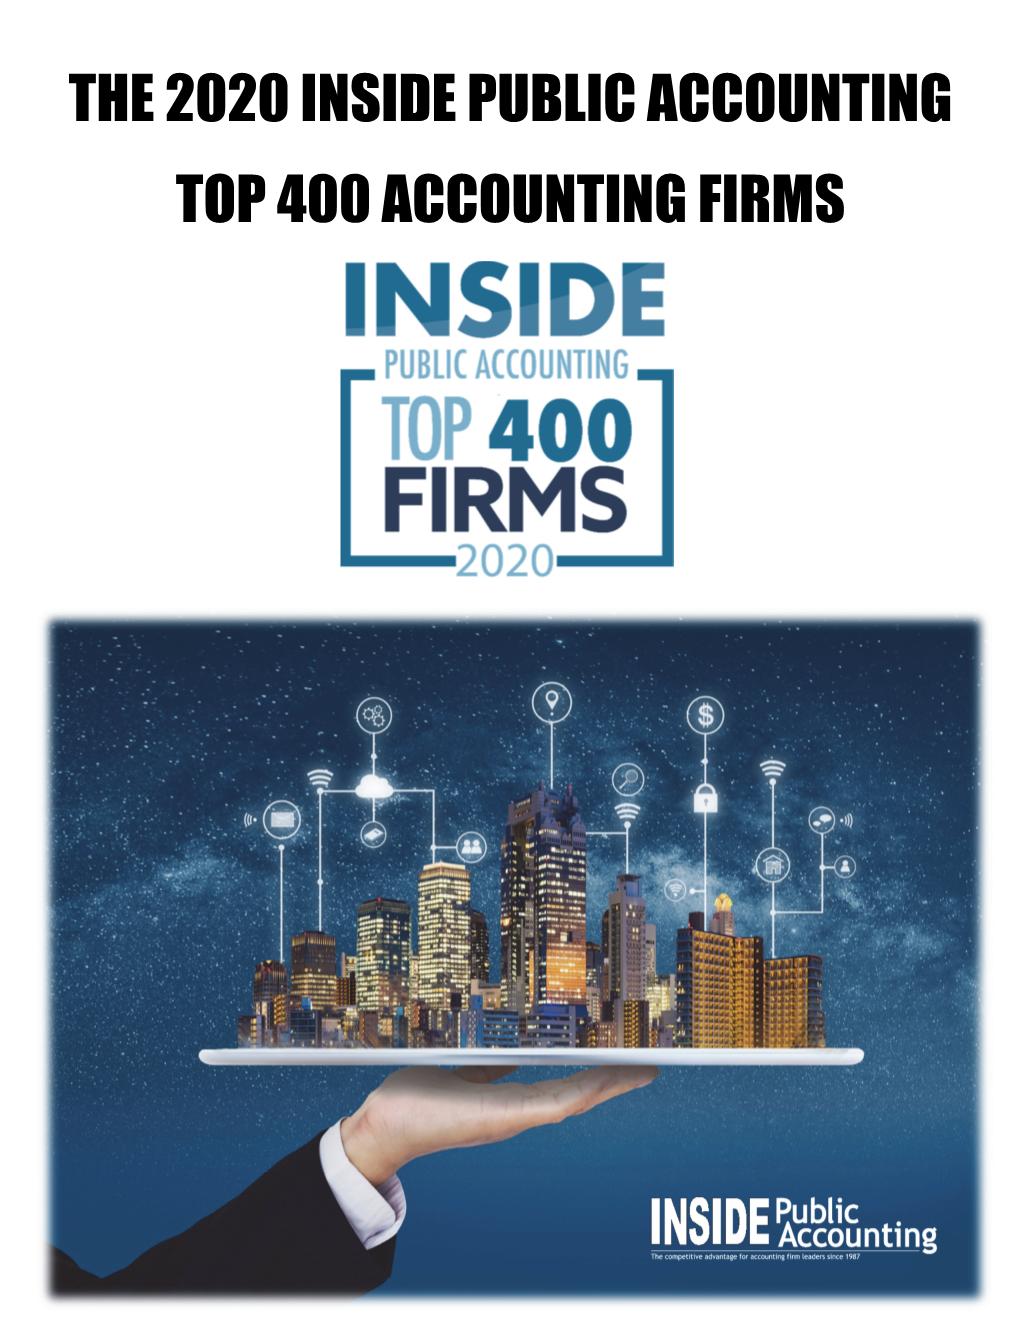 The 2020 Ipa Top 400 Firms